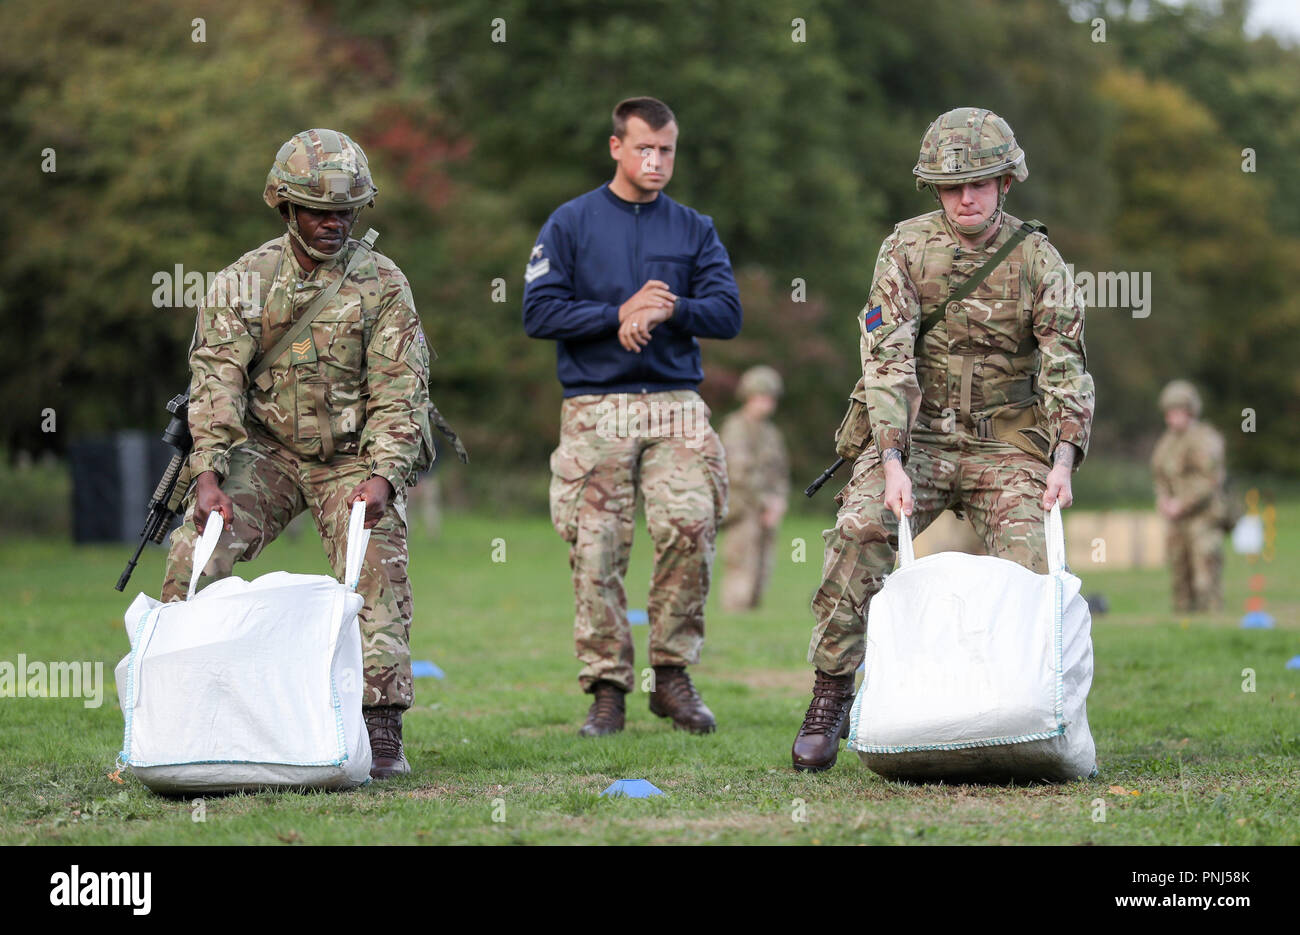 Soldiers Demonstrate The Casualty Drag Stage In The British Armys New